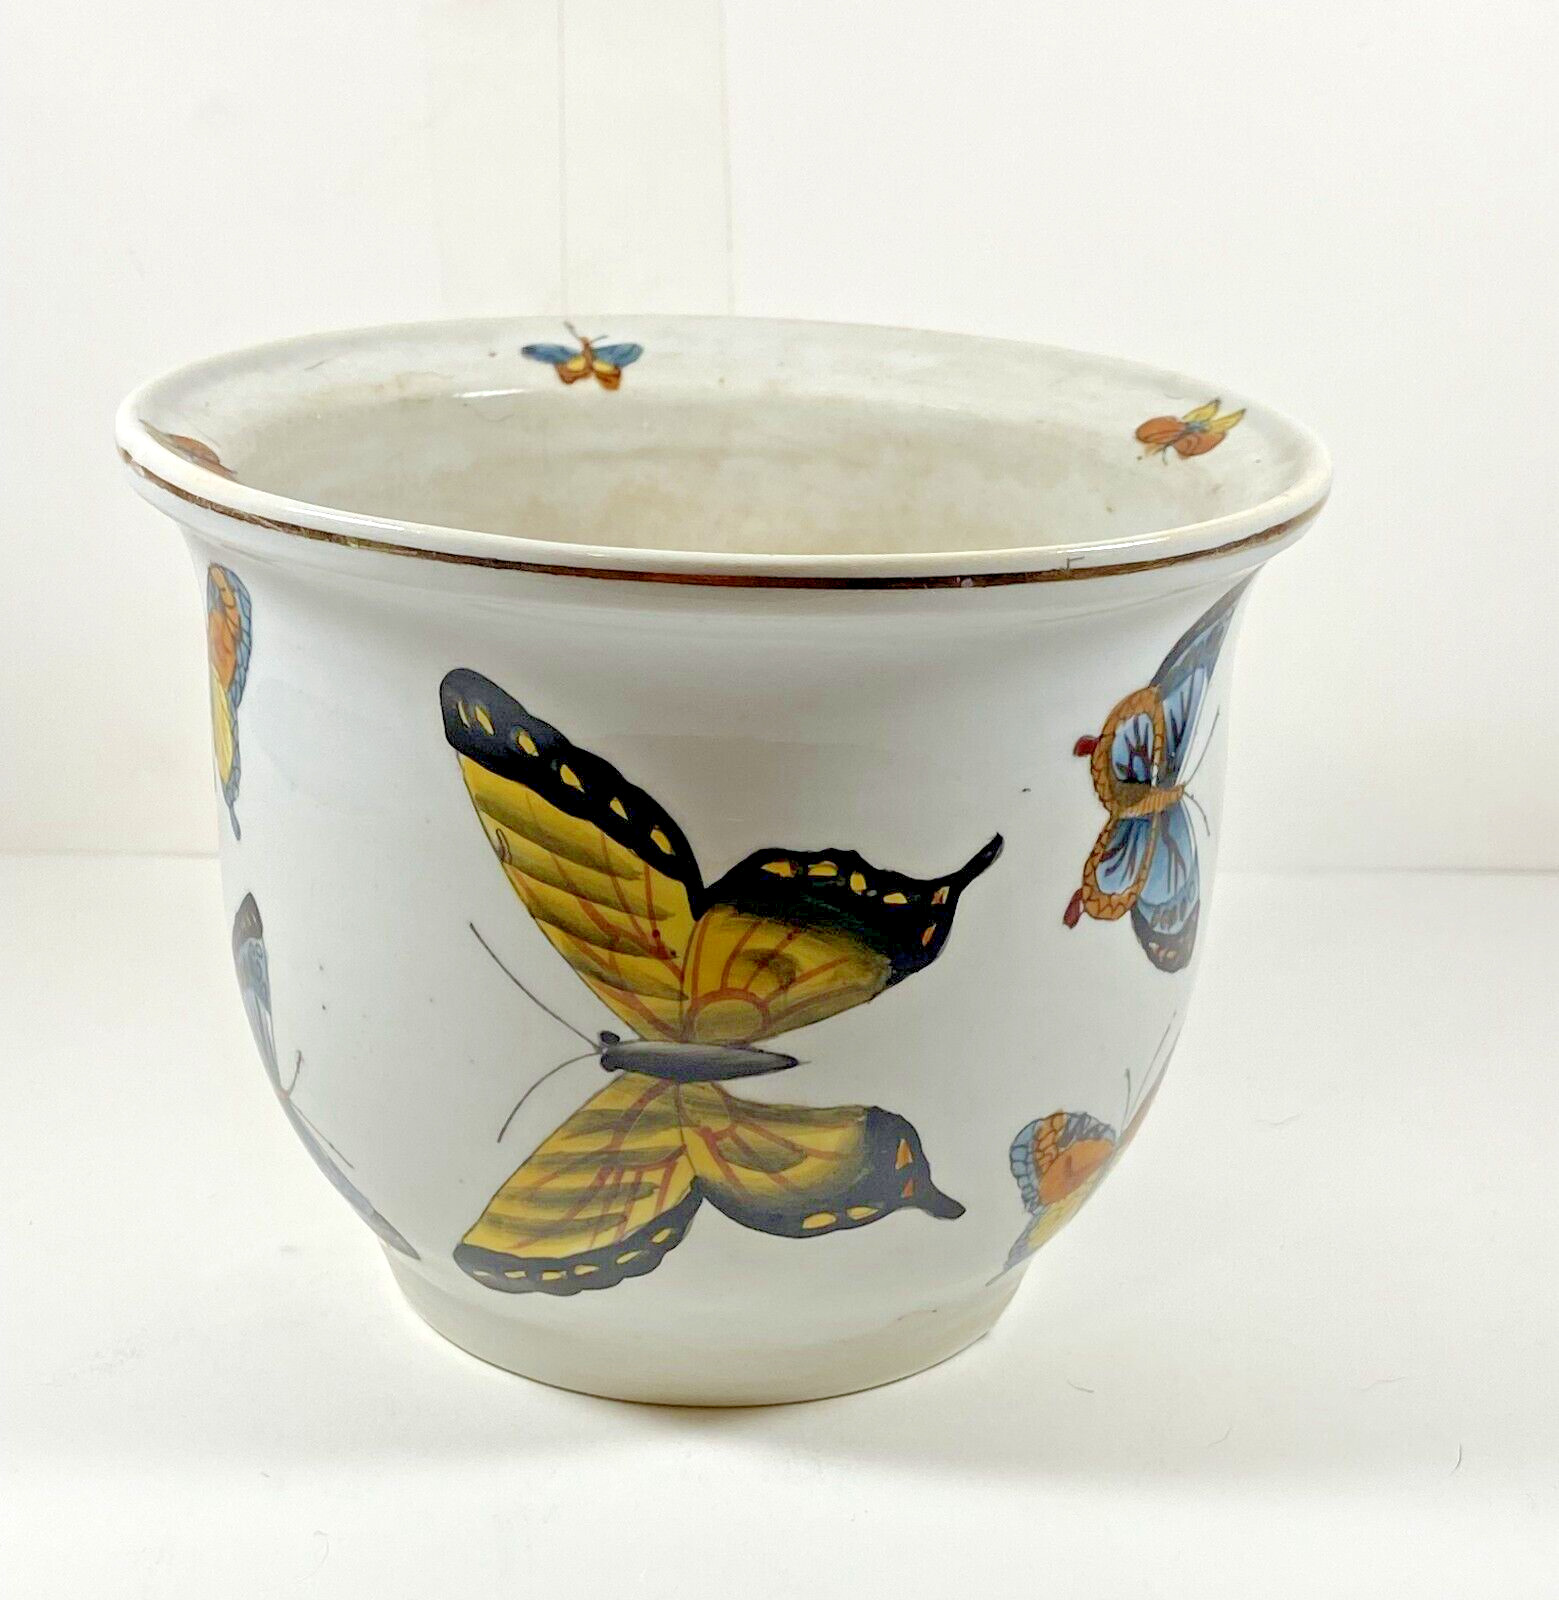 Vintage Style Butterfly Ceramic Flower Planter Pot Needs Cleaned Some Staining